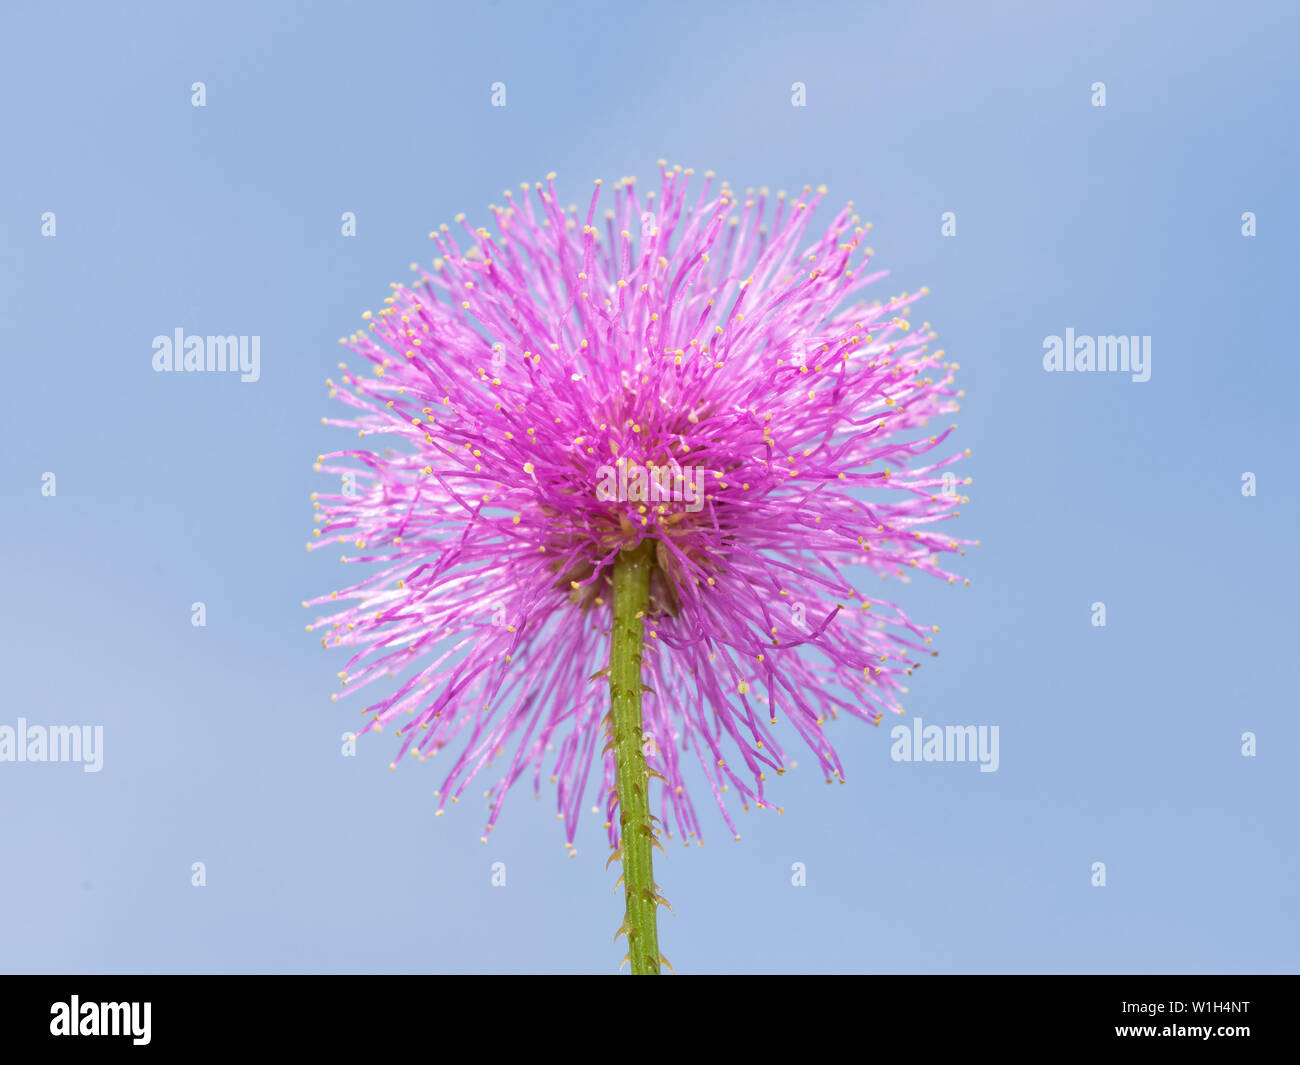 Single bloom of pink Mimosa nuttallii, or Nuttall's Sensitive Briar, against clear blue sky Stock Photo